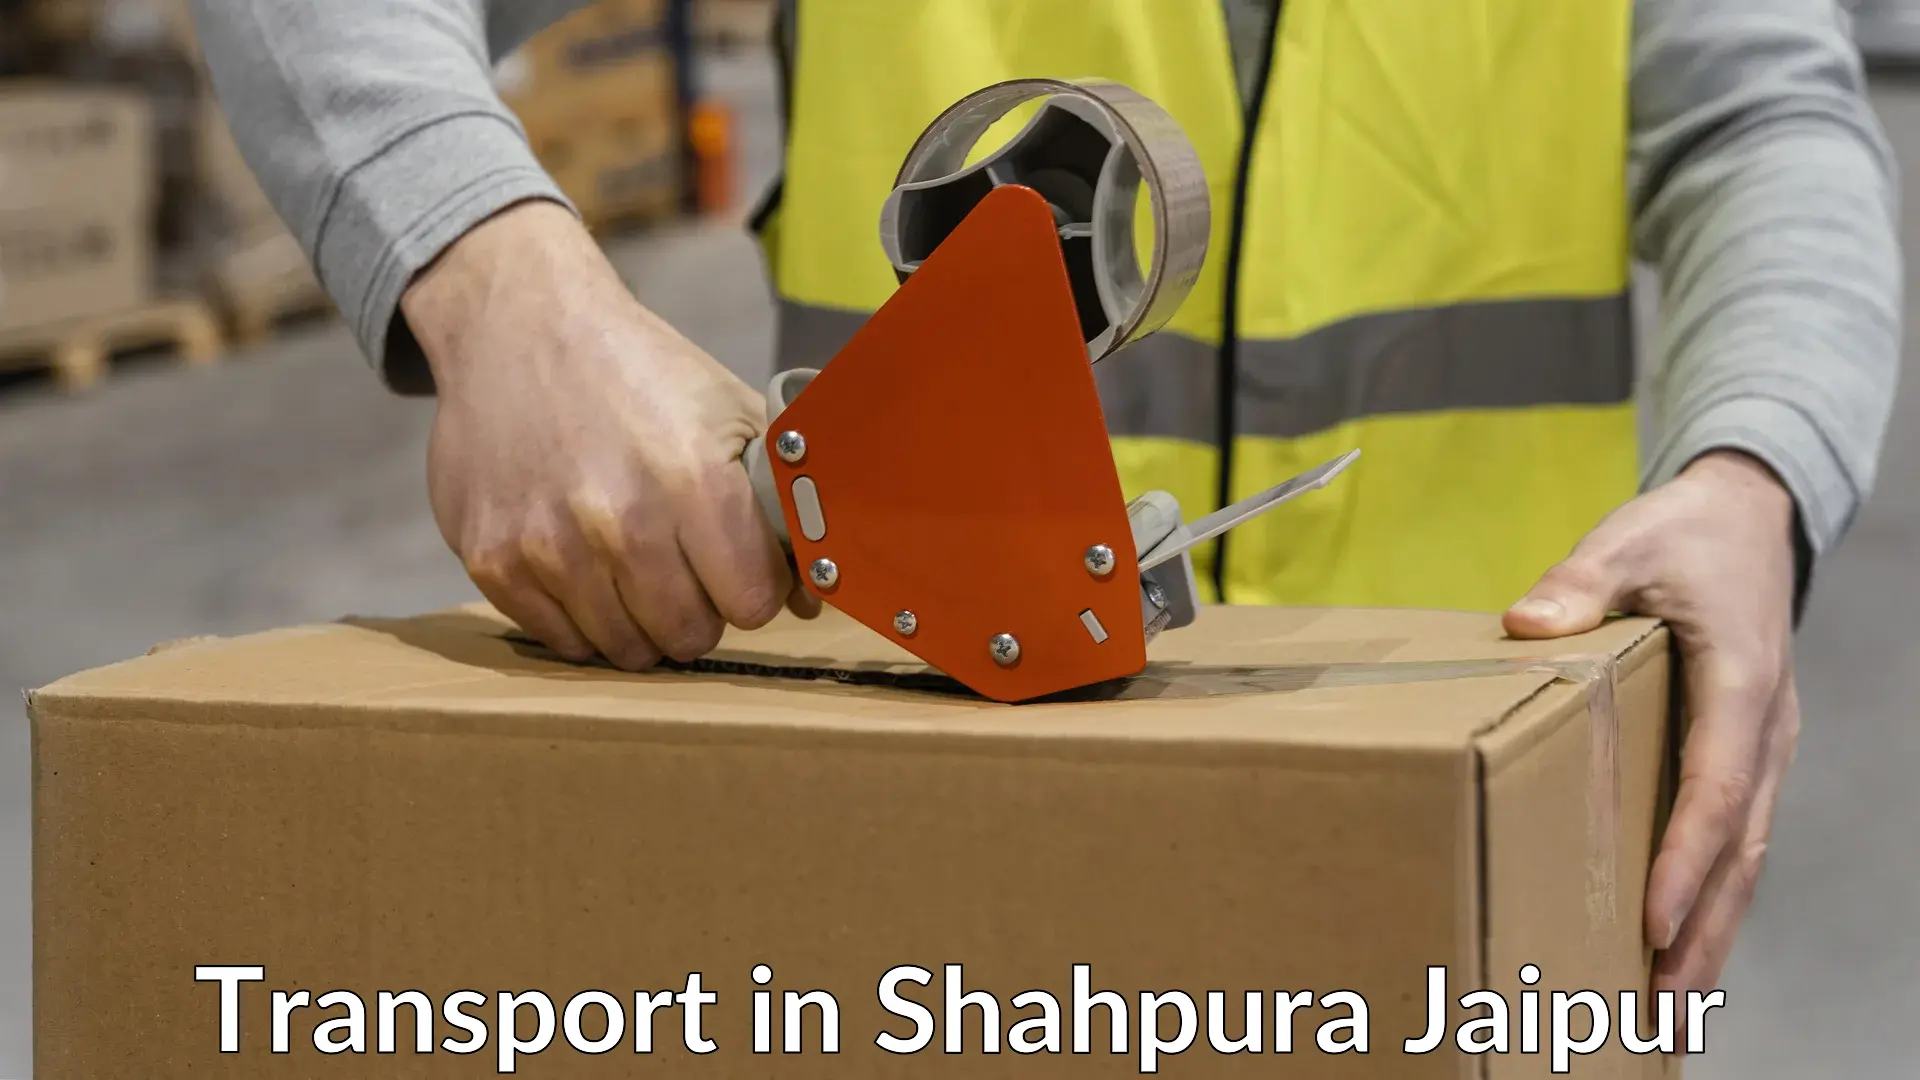 Transport bike from one state to another in Shahpura Jaipur